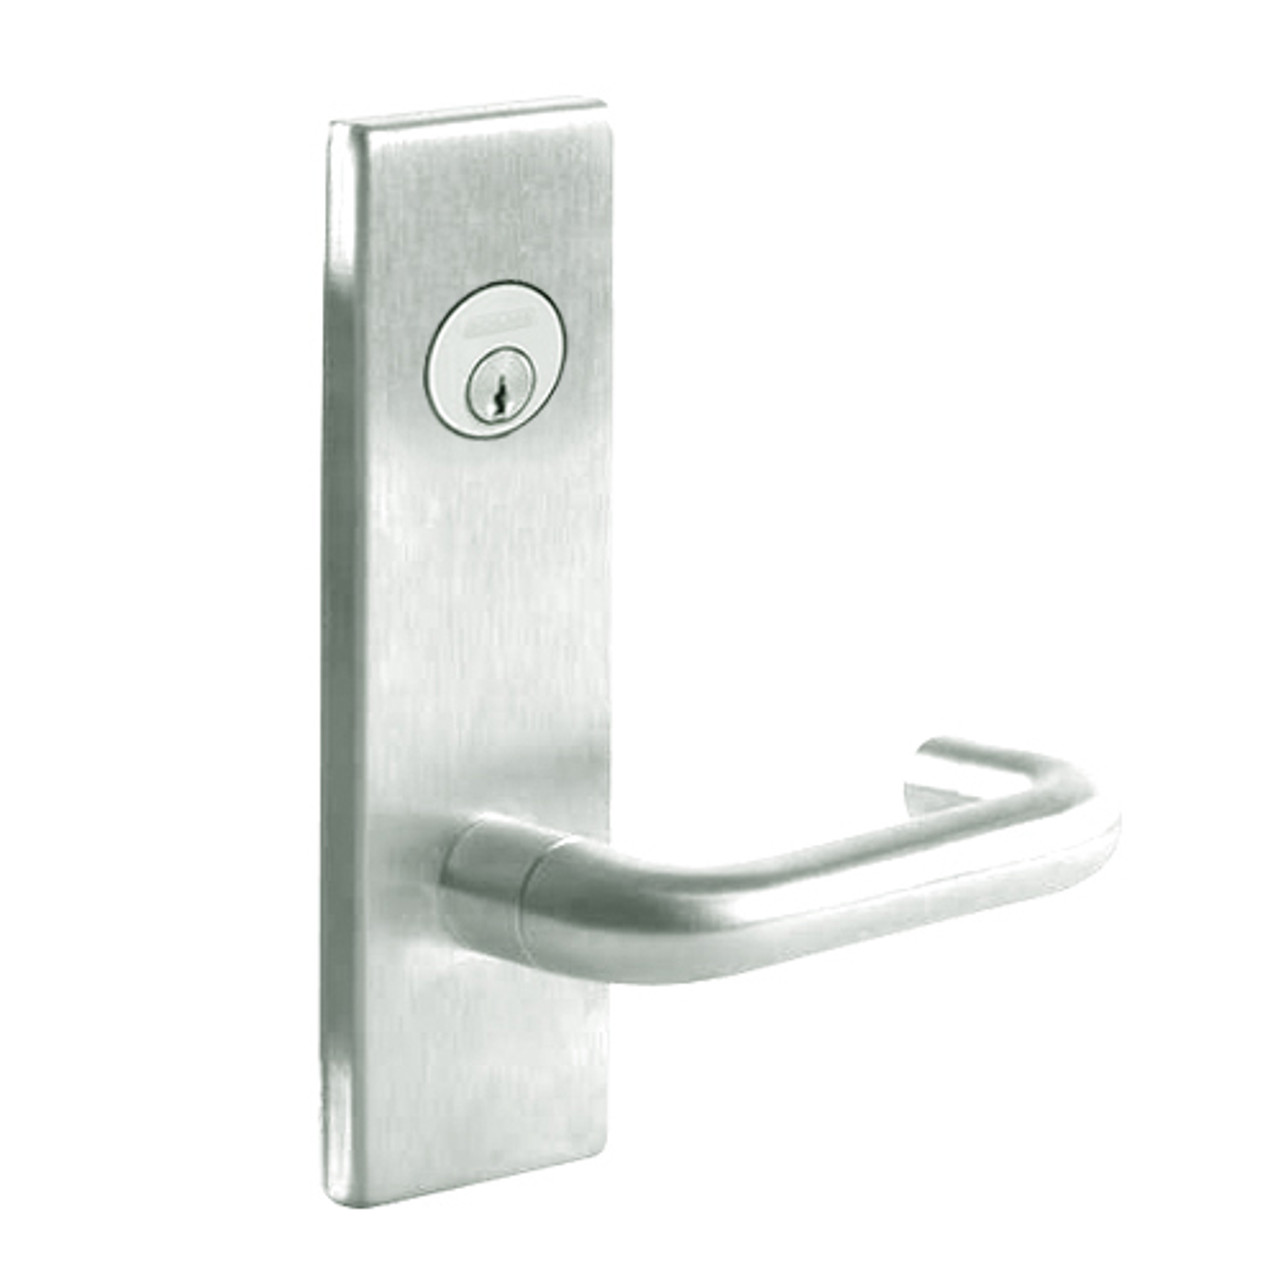 L9050L-03N-619 Schlage L Series Less Cylinder Entrance Commercial Mortise Lock with 03 Cast Lever Design in Satin Nickel